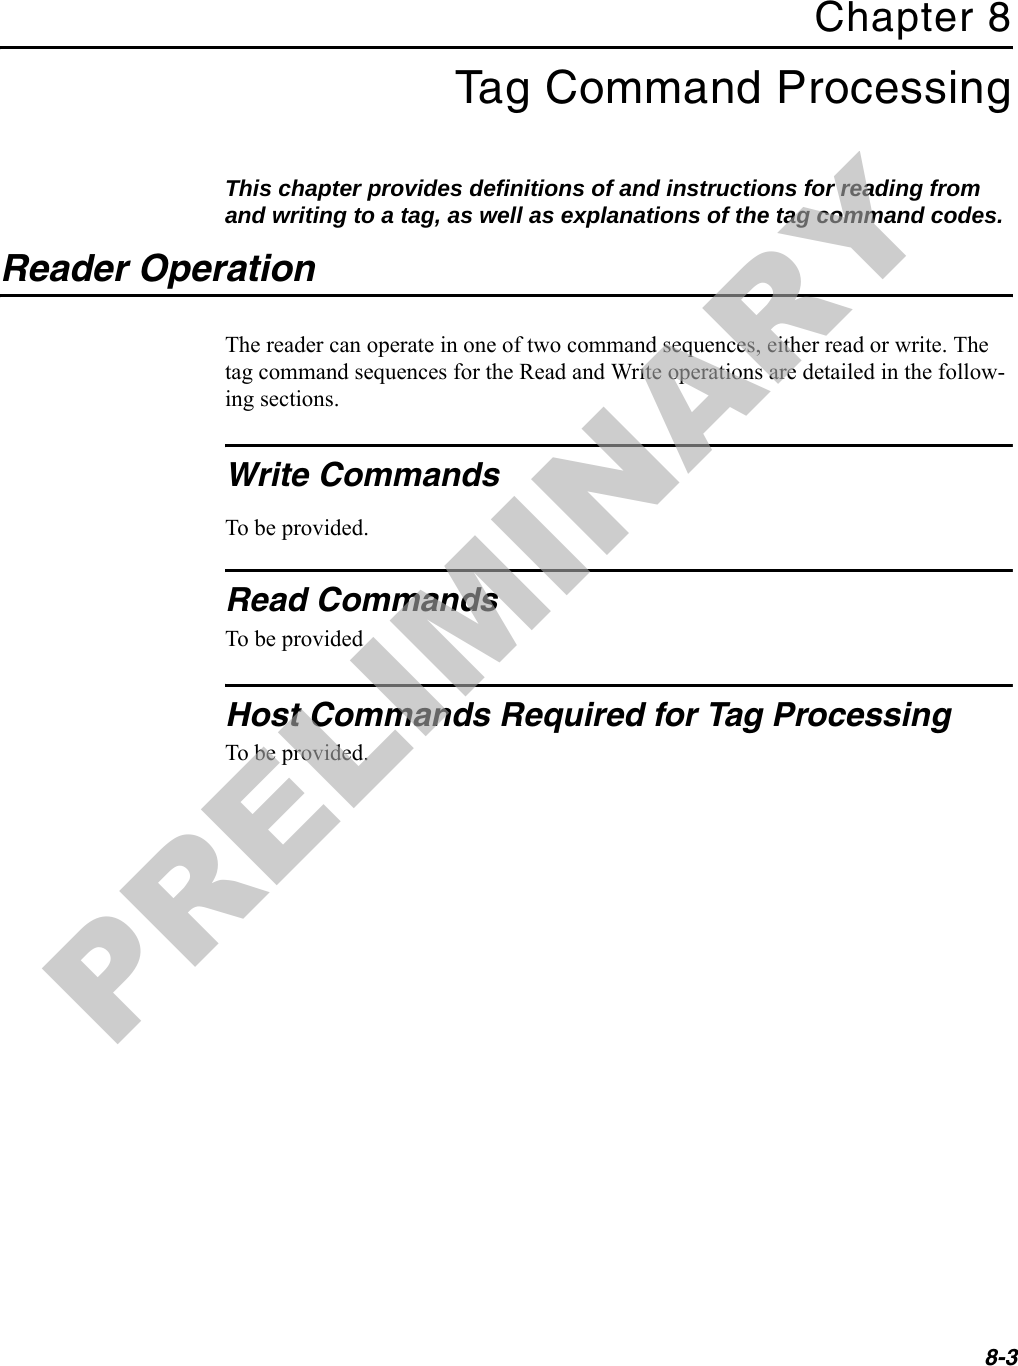 8-3Chapter 8Tag Command ProcessingThis chapter provides definitions of and instructions for reading from and writing to a tag, as well as explanations of the tag command codes.Reader OperationThe reader can operate in one of two command sequences, either read or write. The tag command sequences for the Read and Write operations are detailed in the follow-ing sections.Write CommandsTo be provided.Read CommandsTo be providedHost Commands Required for Tag ProcessingTo be provided.PRELIMINARY